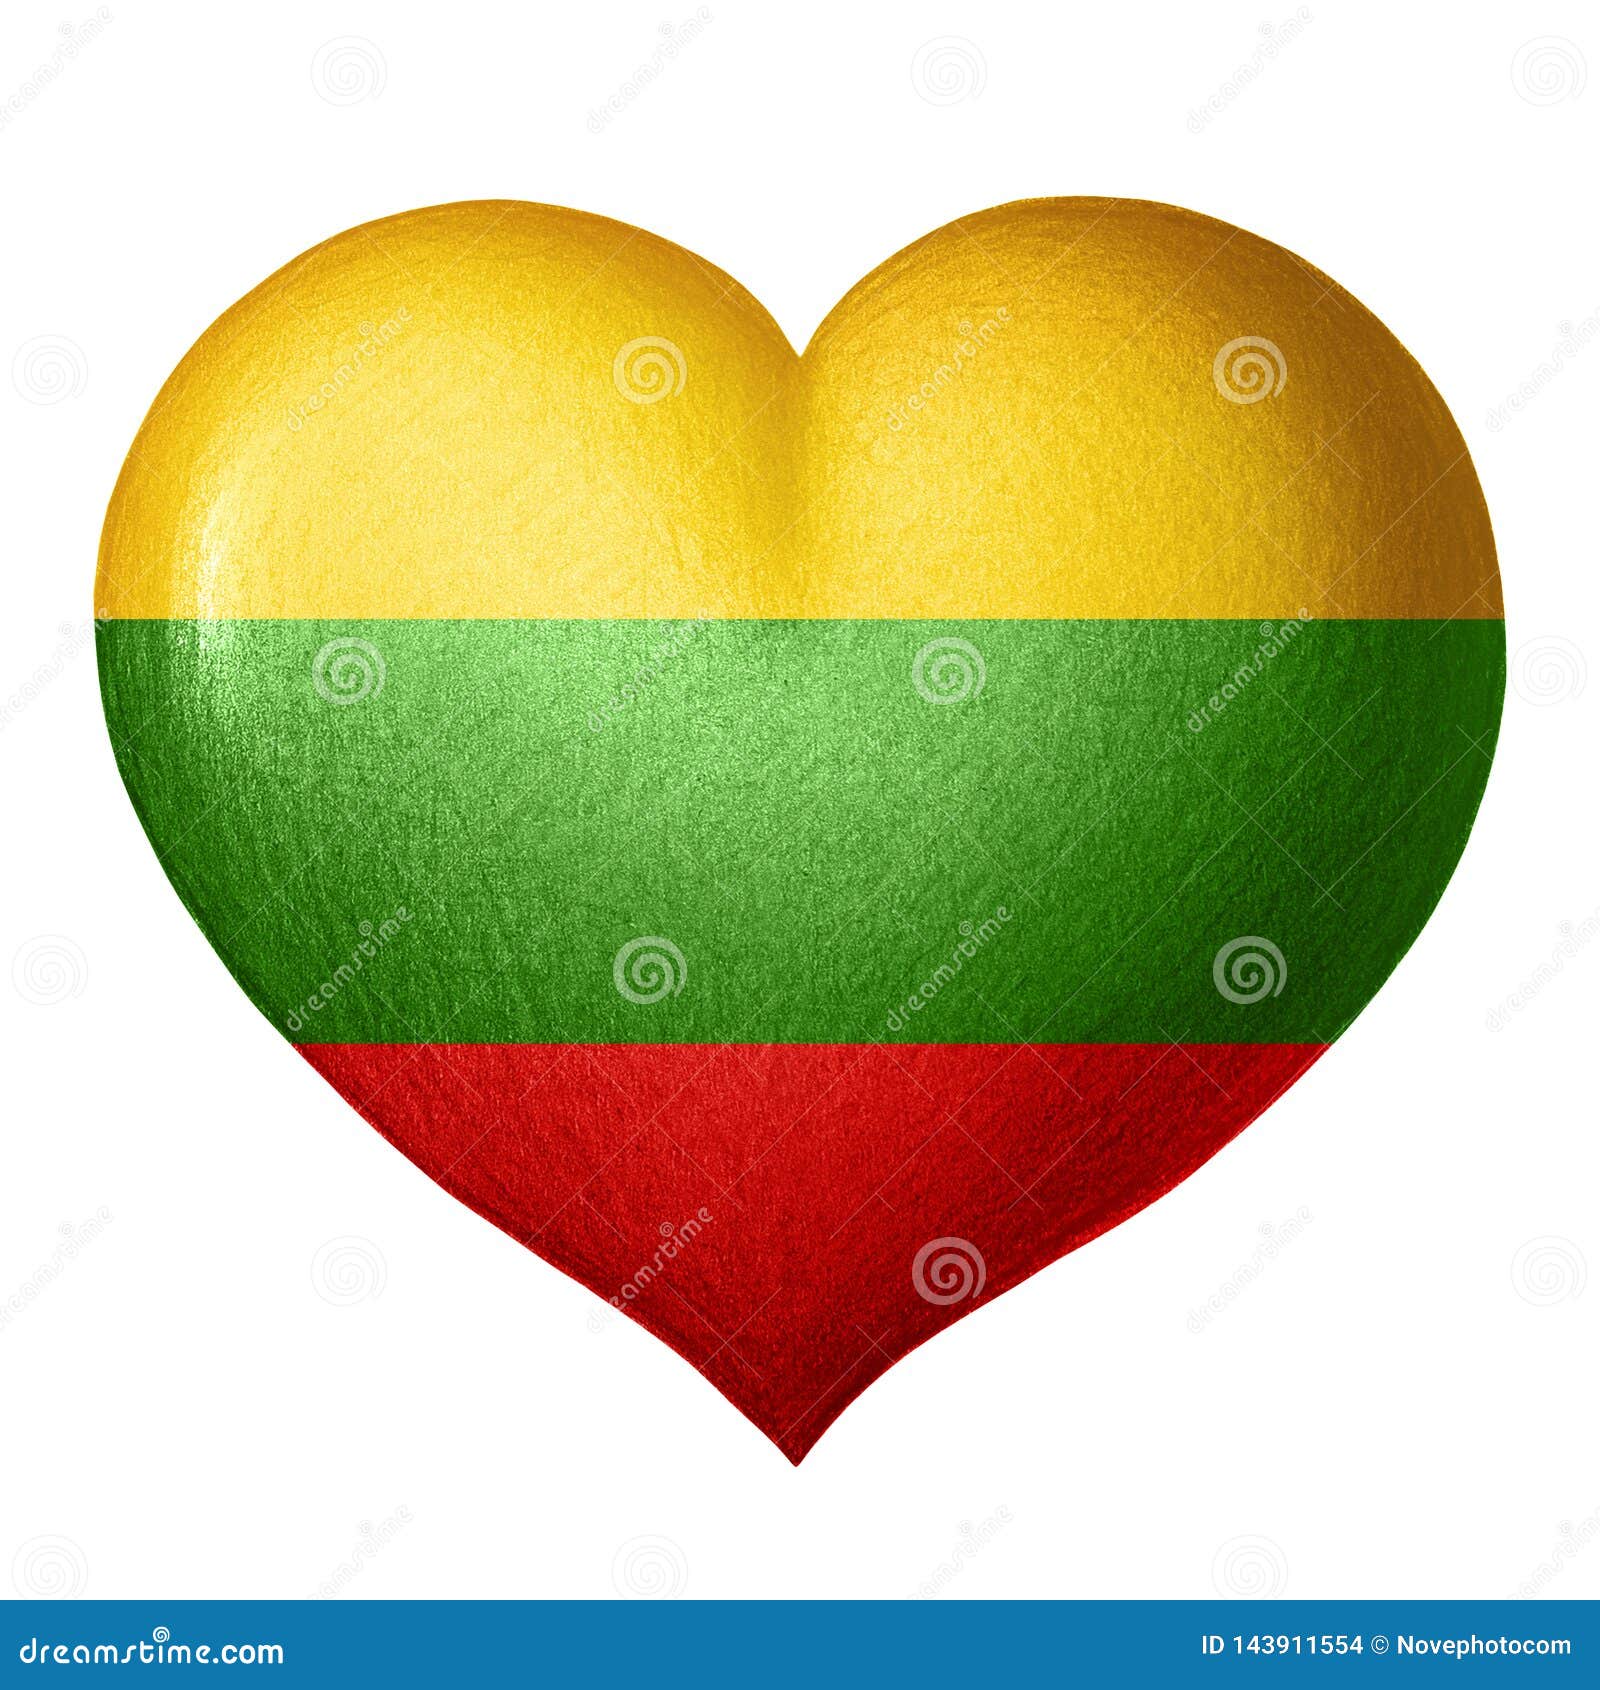 Lithuania Pencil : Flag of Lithuania Inspired Colored ...